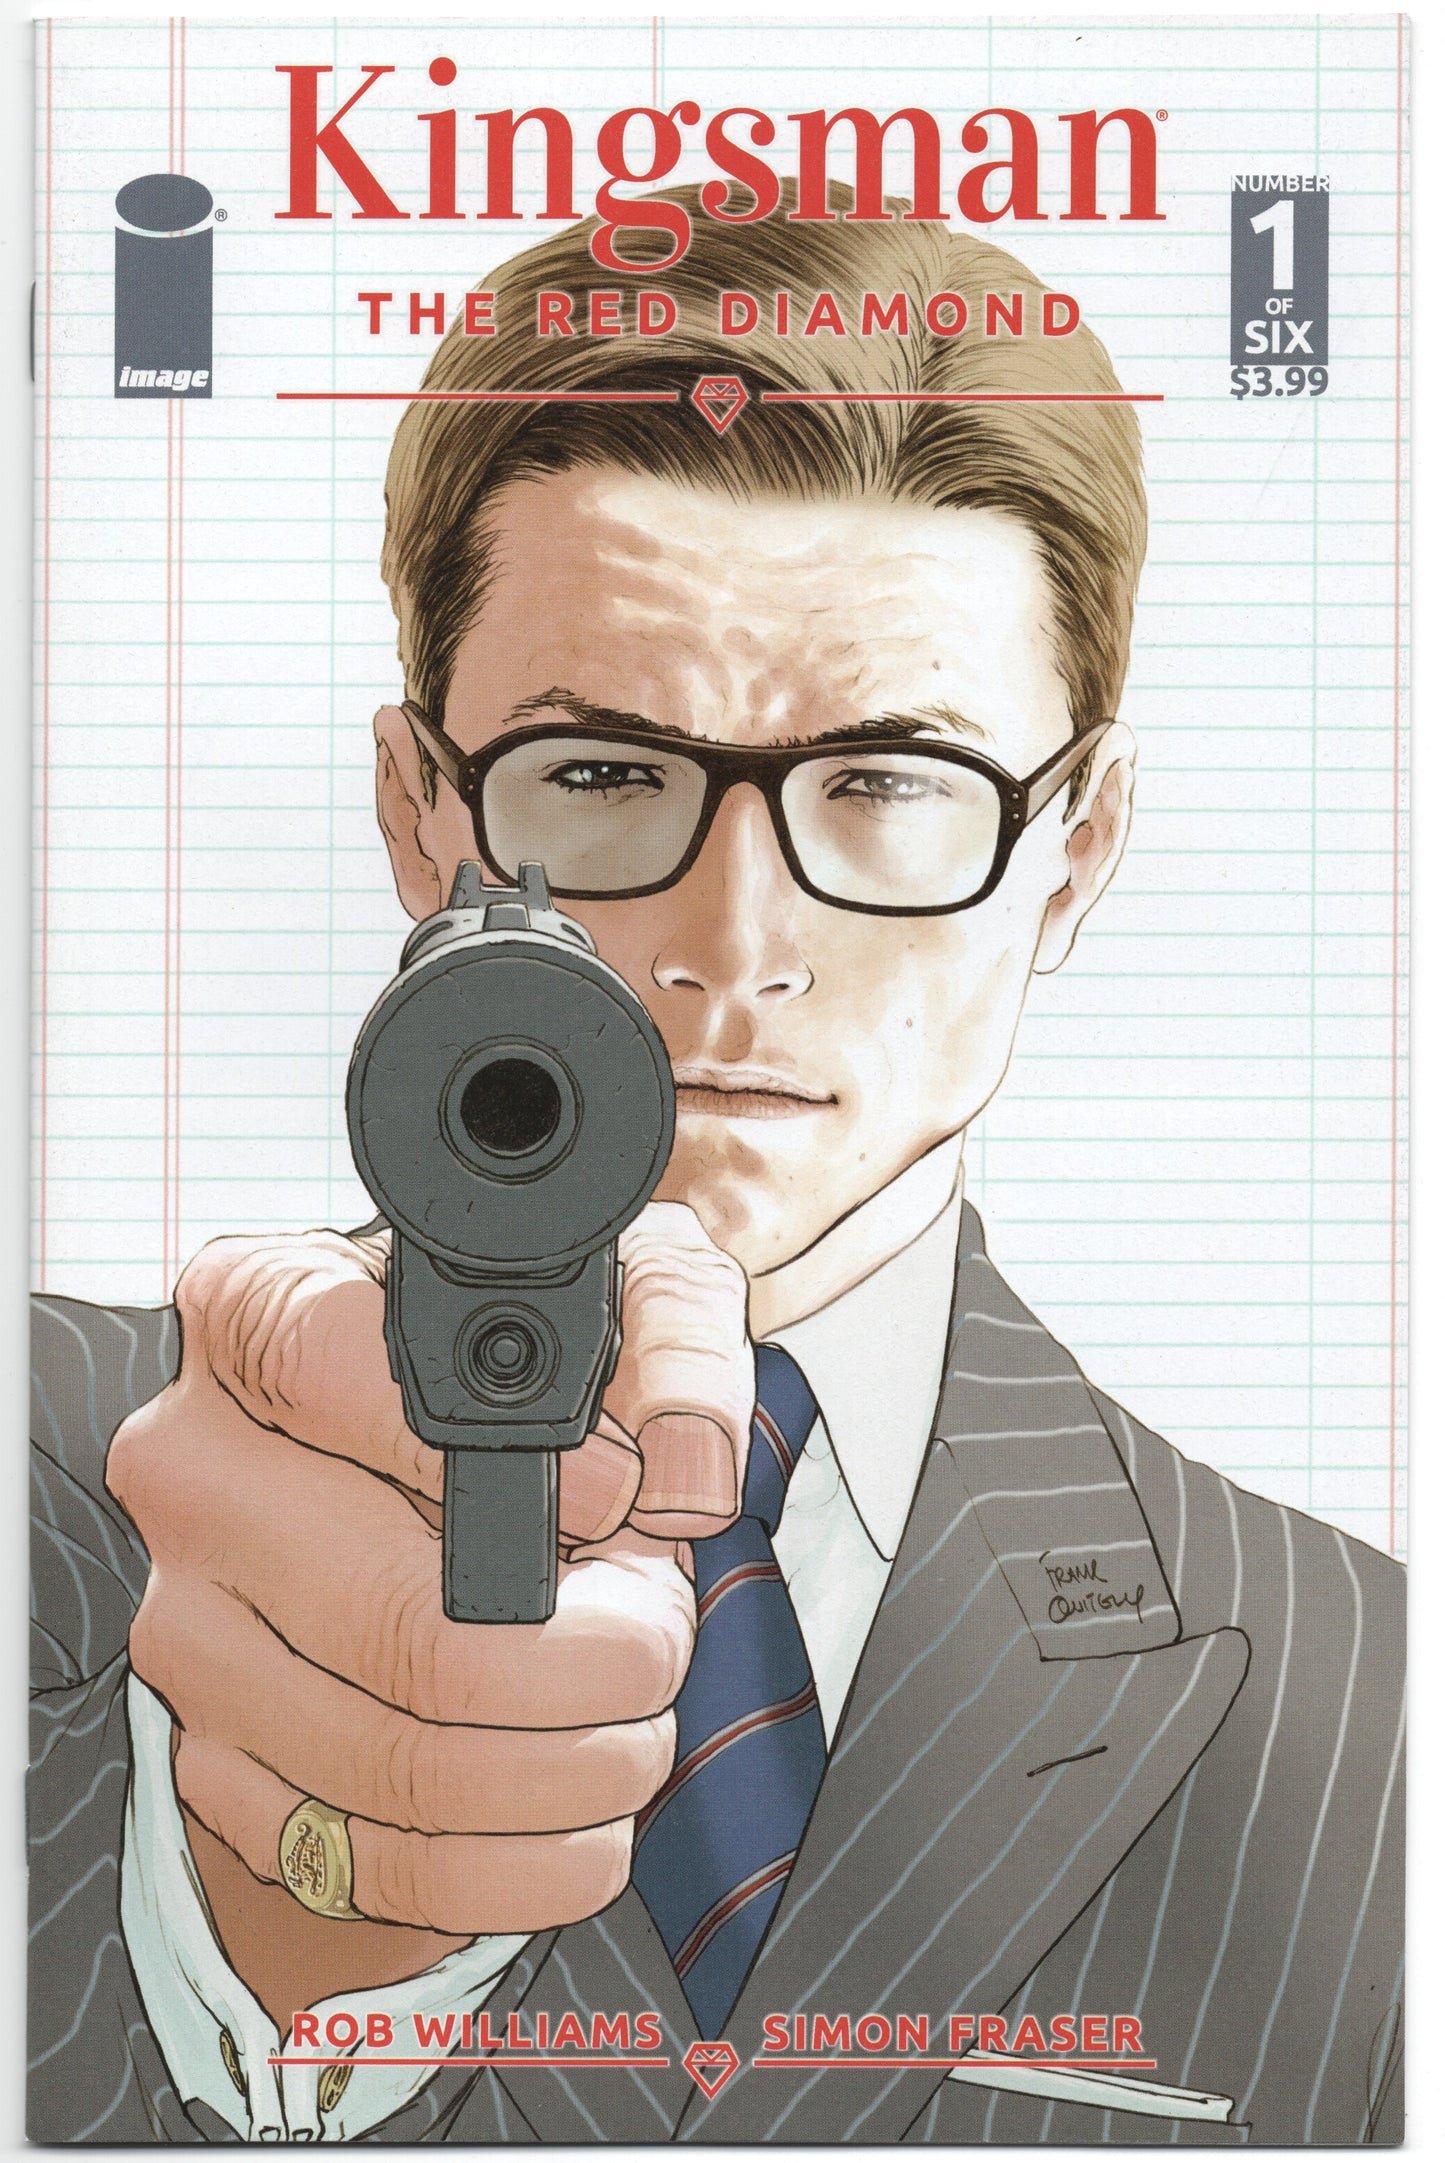 Kingsman The Red Diamond 1 A Image 2017 NM Frank Quietly Movie